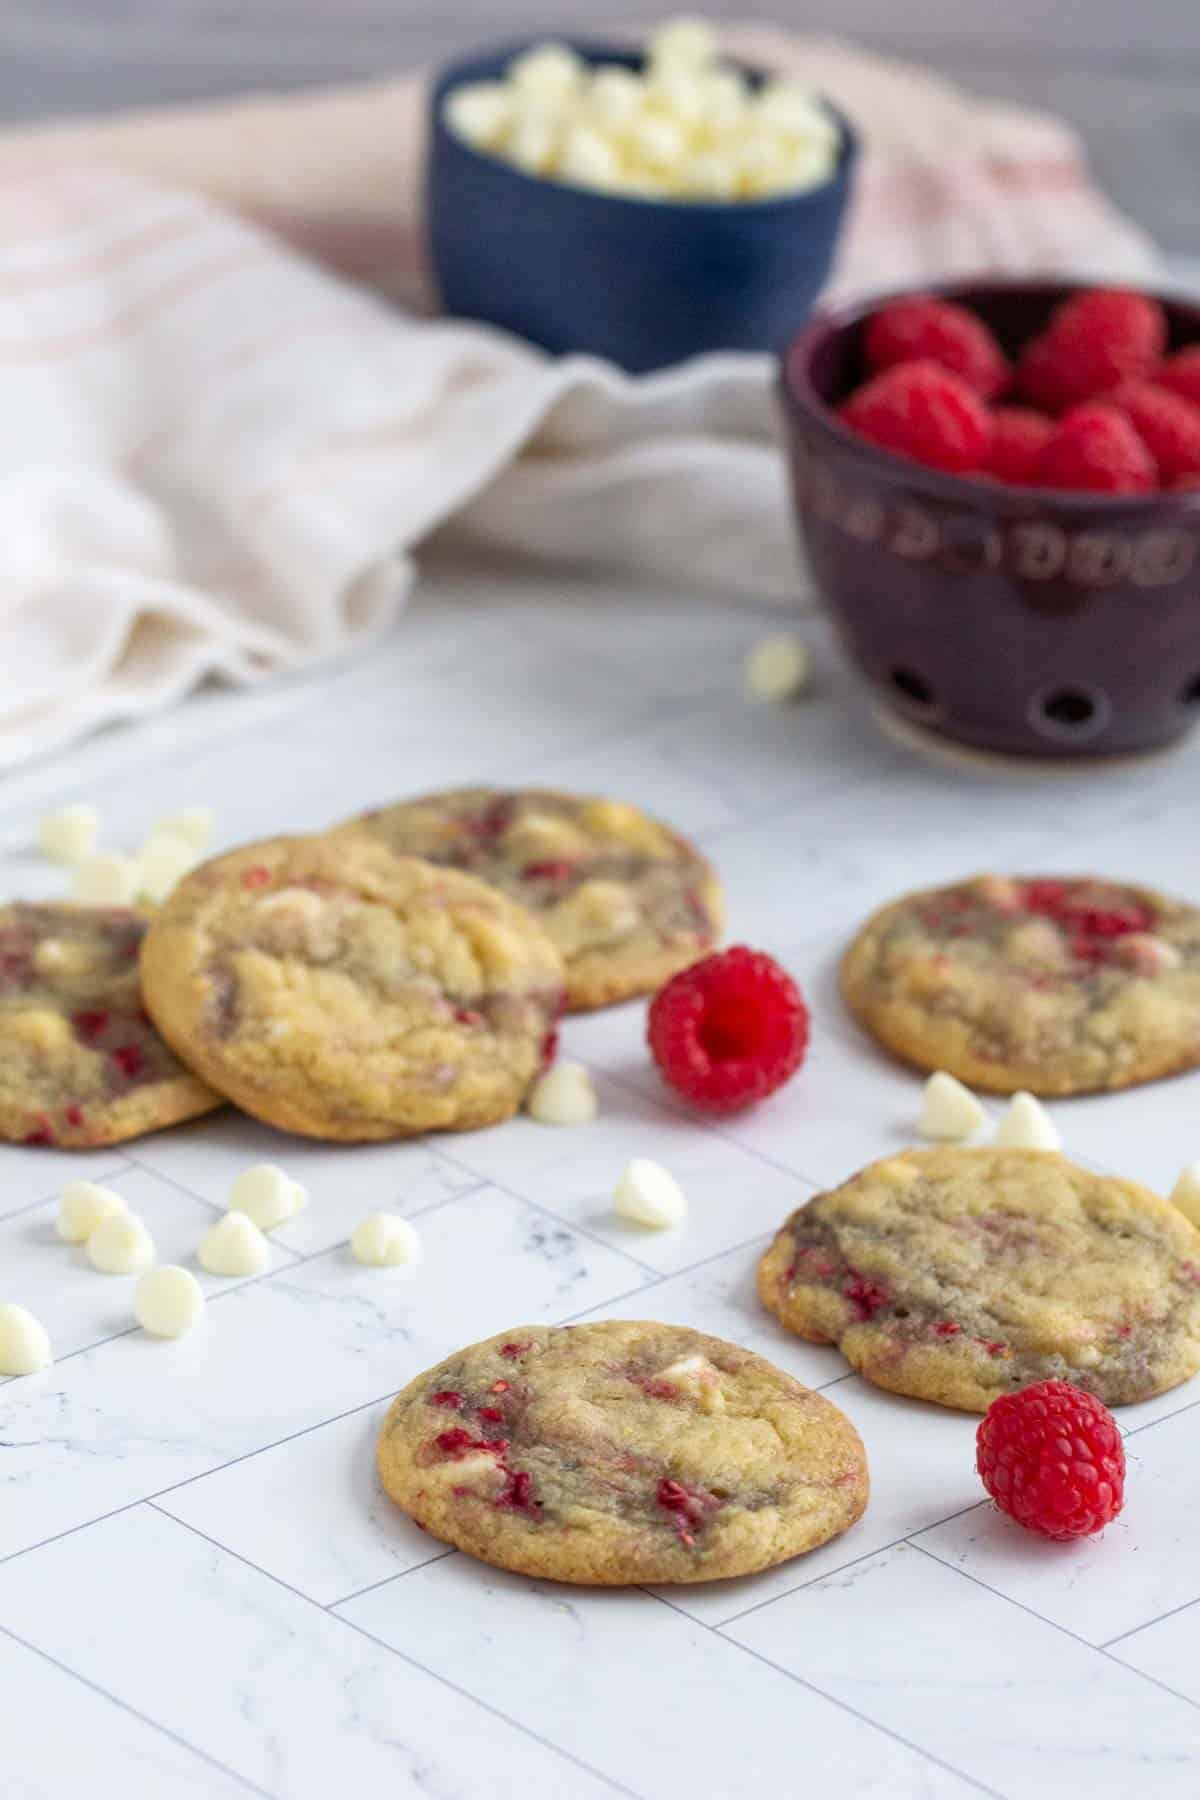 raspberry white chocolate cookies with white chocolate chips and raspberries beside